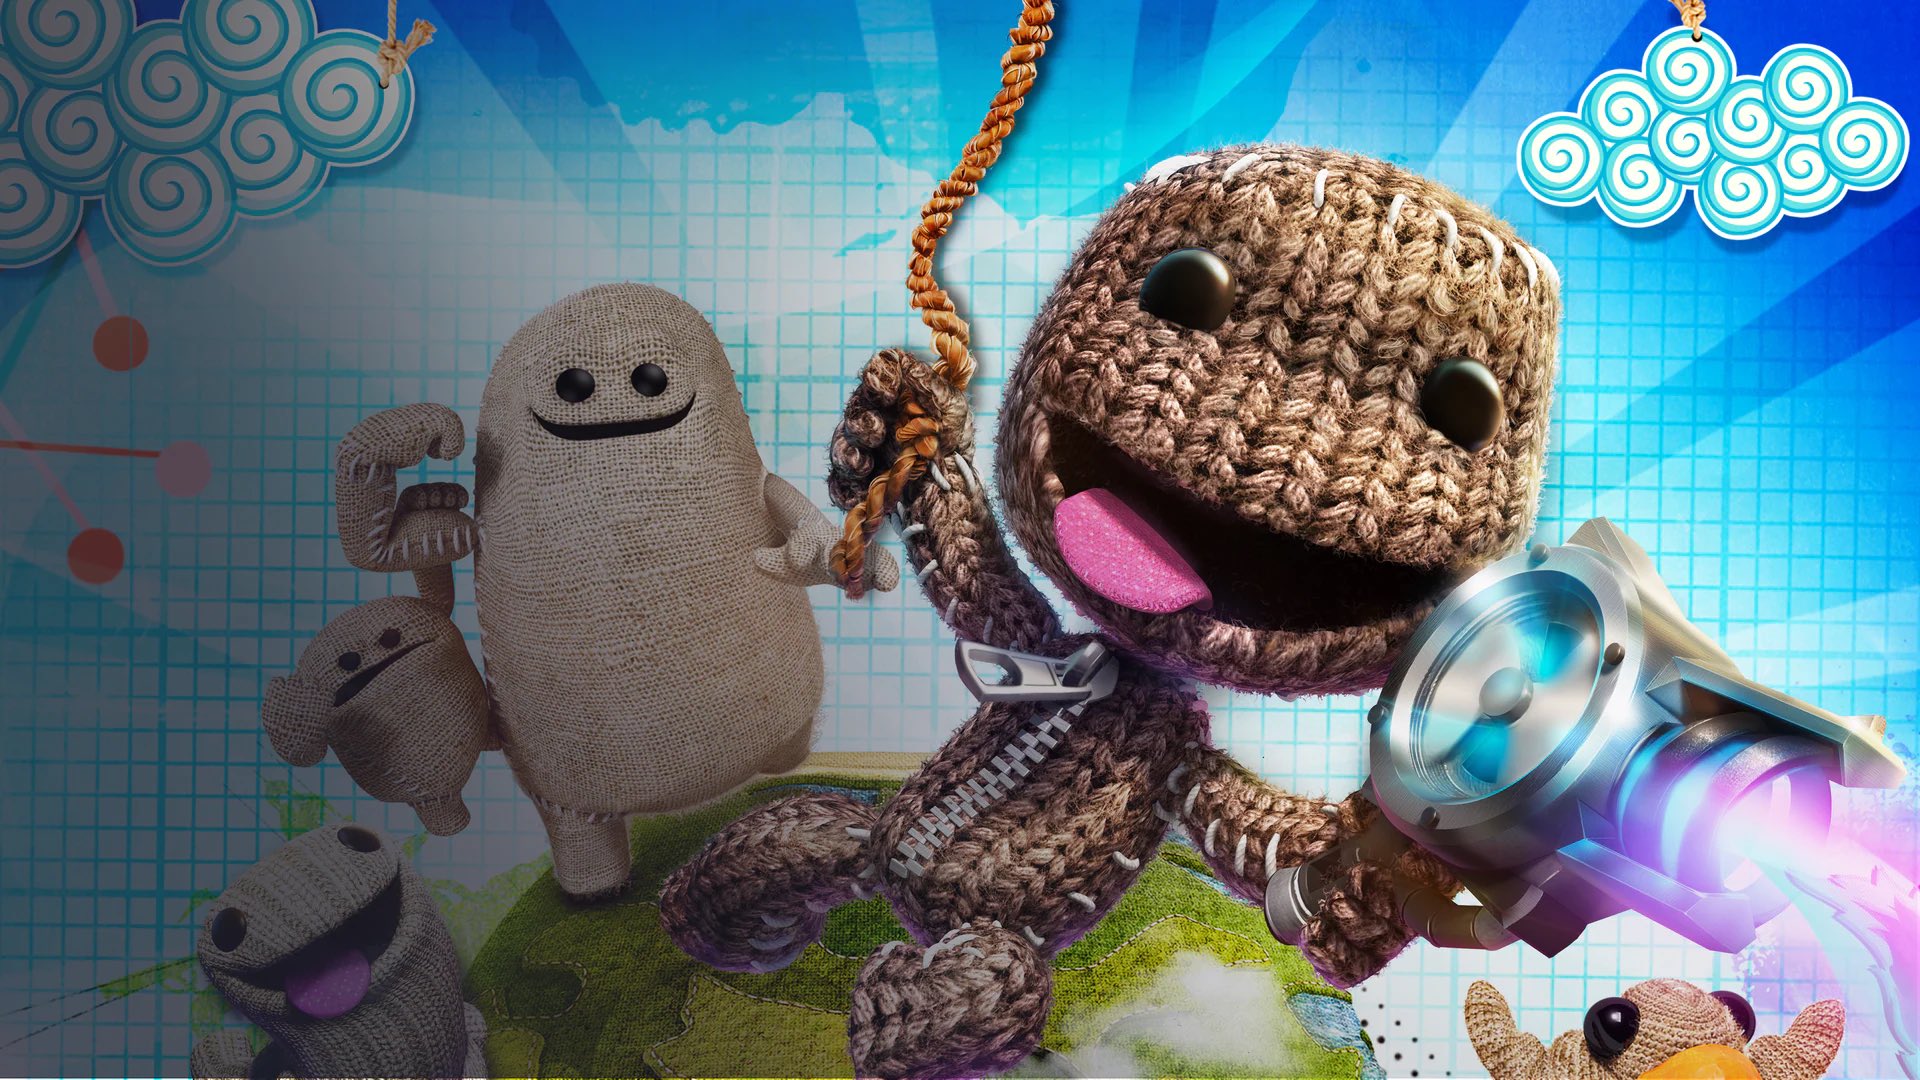 Image from Little Big Planet